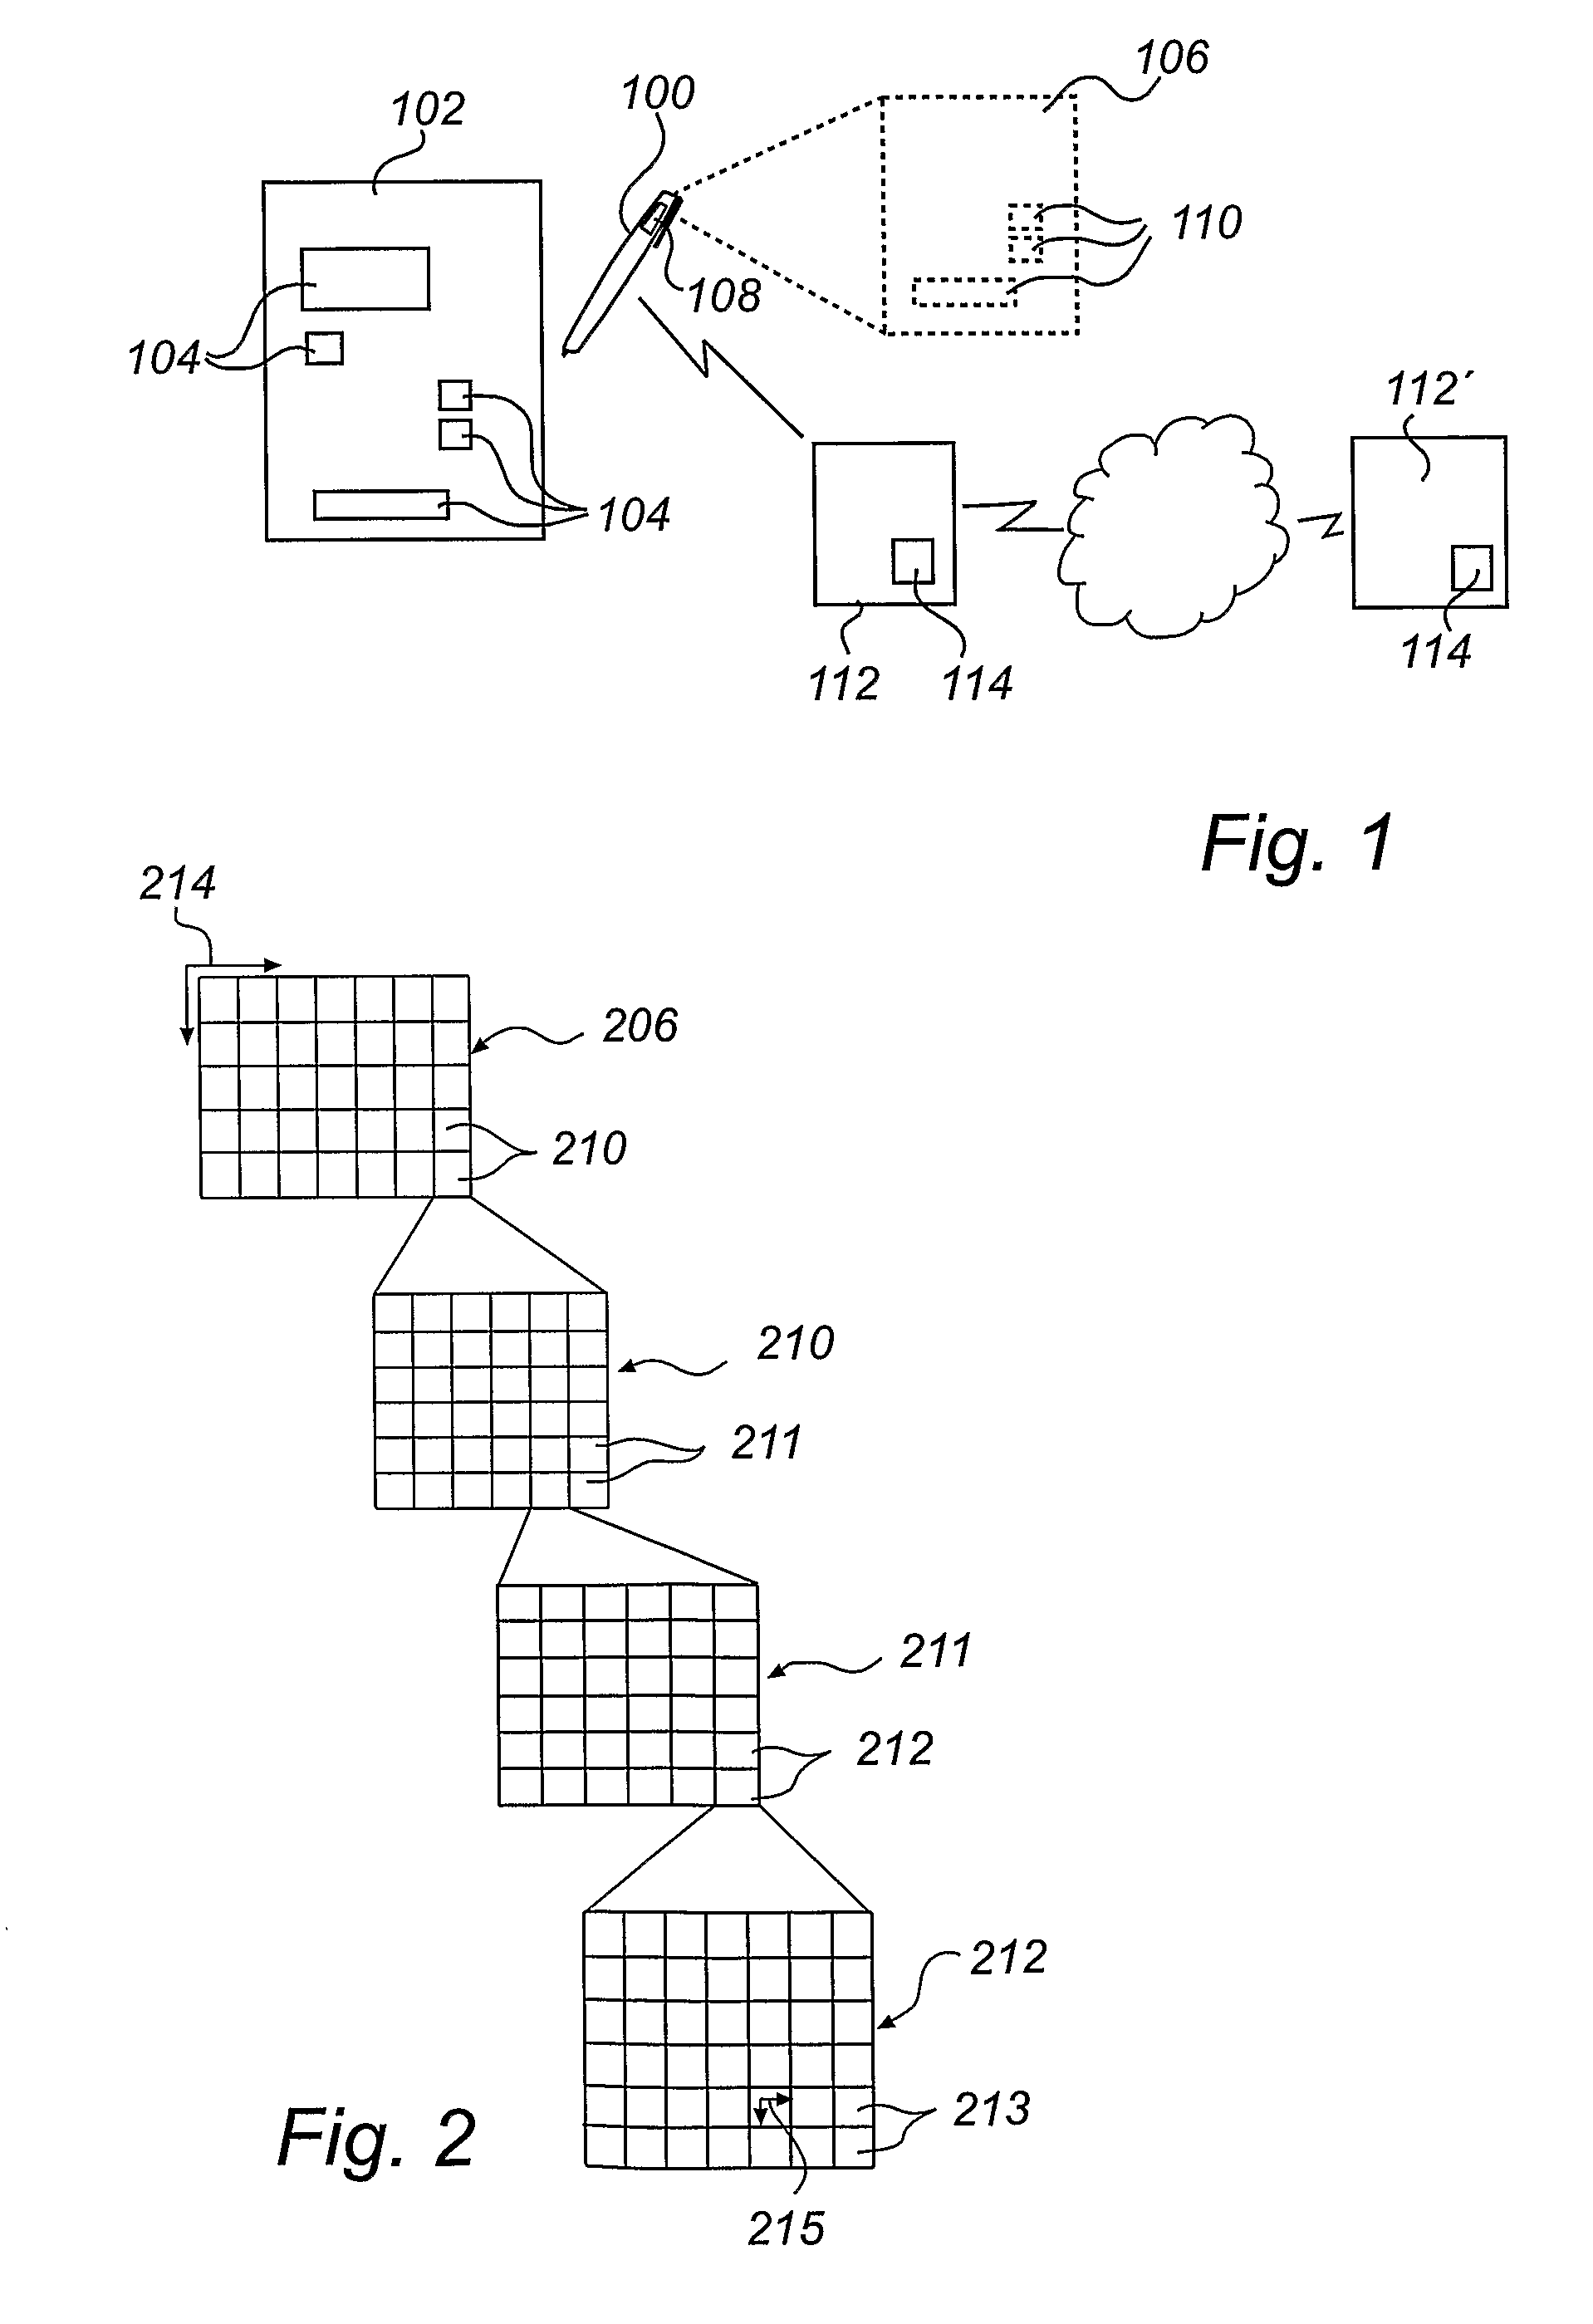 Management of Internal Logic for Electronic Pens